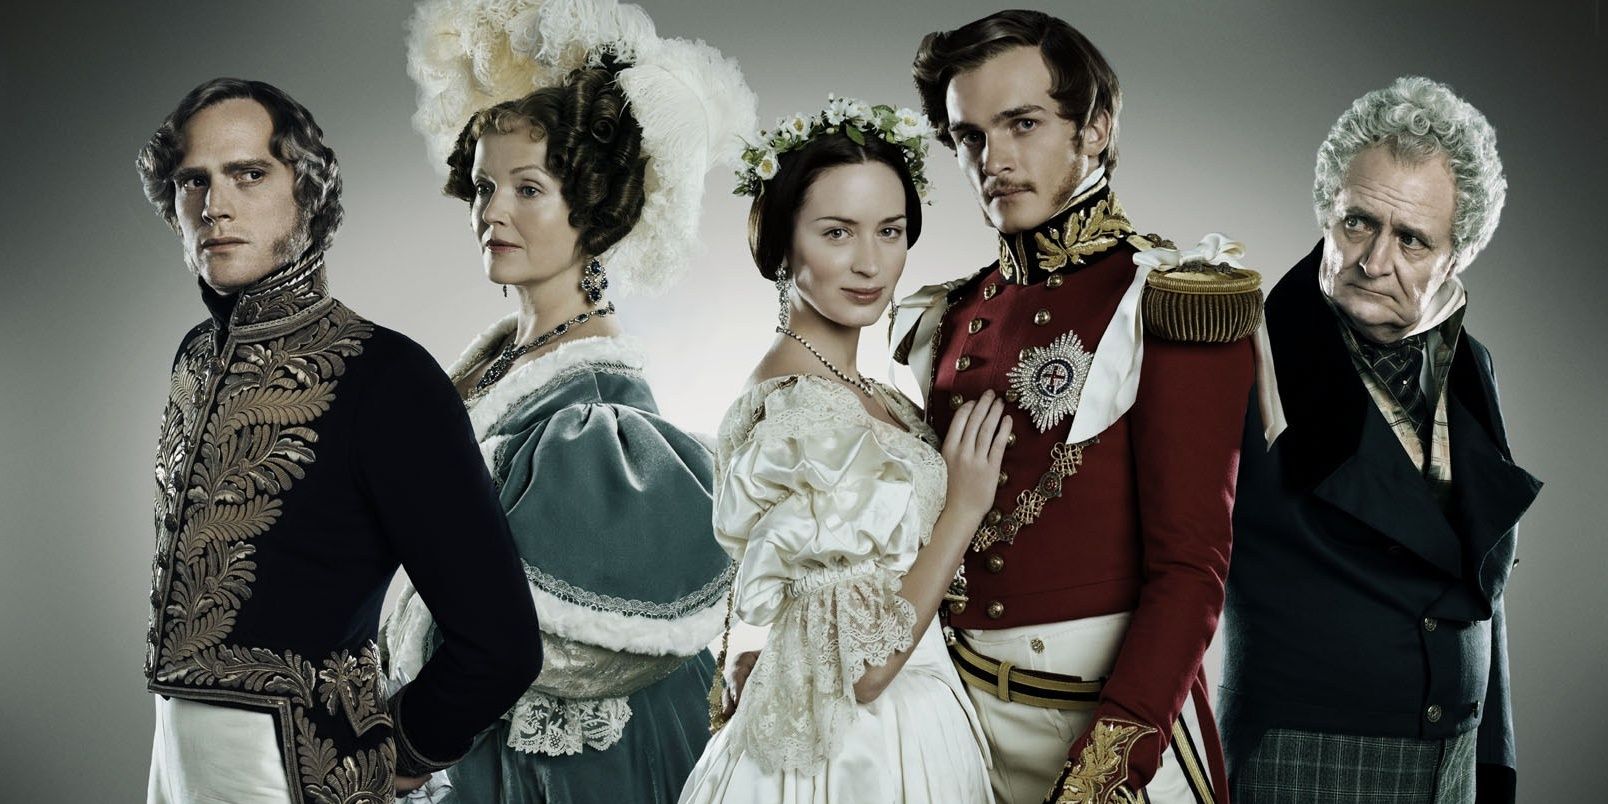 Emily Blunt, Rupert Friend, Jim Broadbent, Paul Bettany in the poster of The Young Victoria